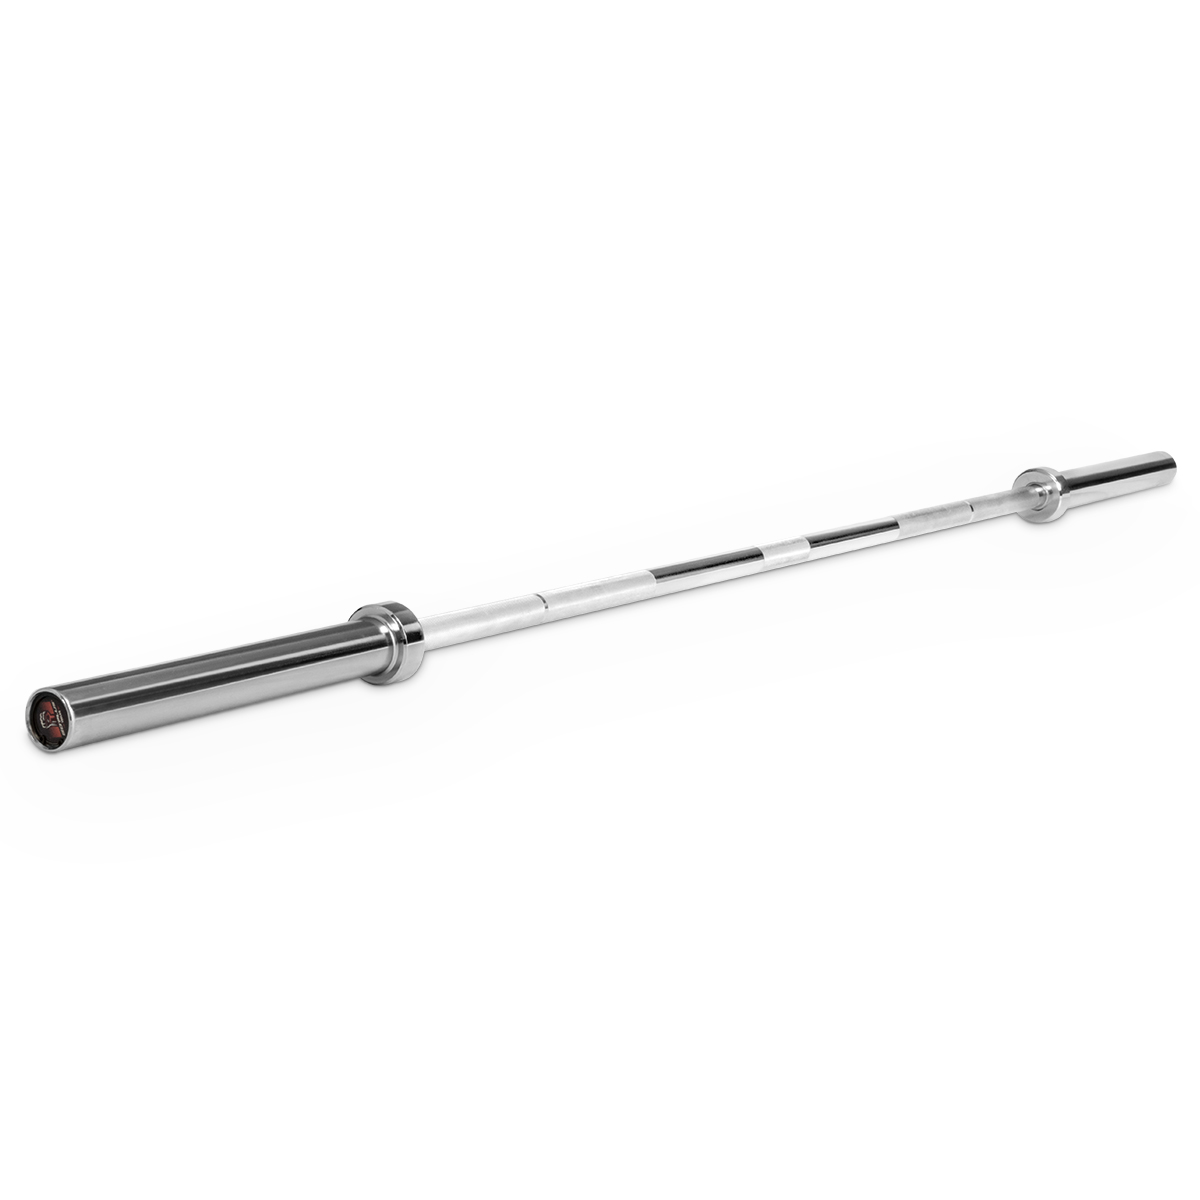 Topbuy 700 lbs Olympic Chromed Bar Multipurpose Straight Weight Lifting Bar 7-Foot